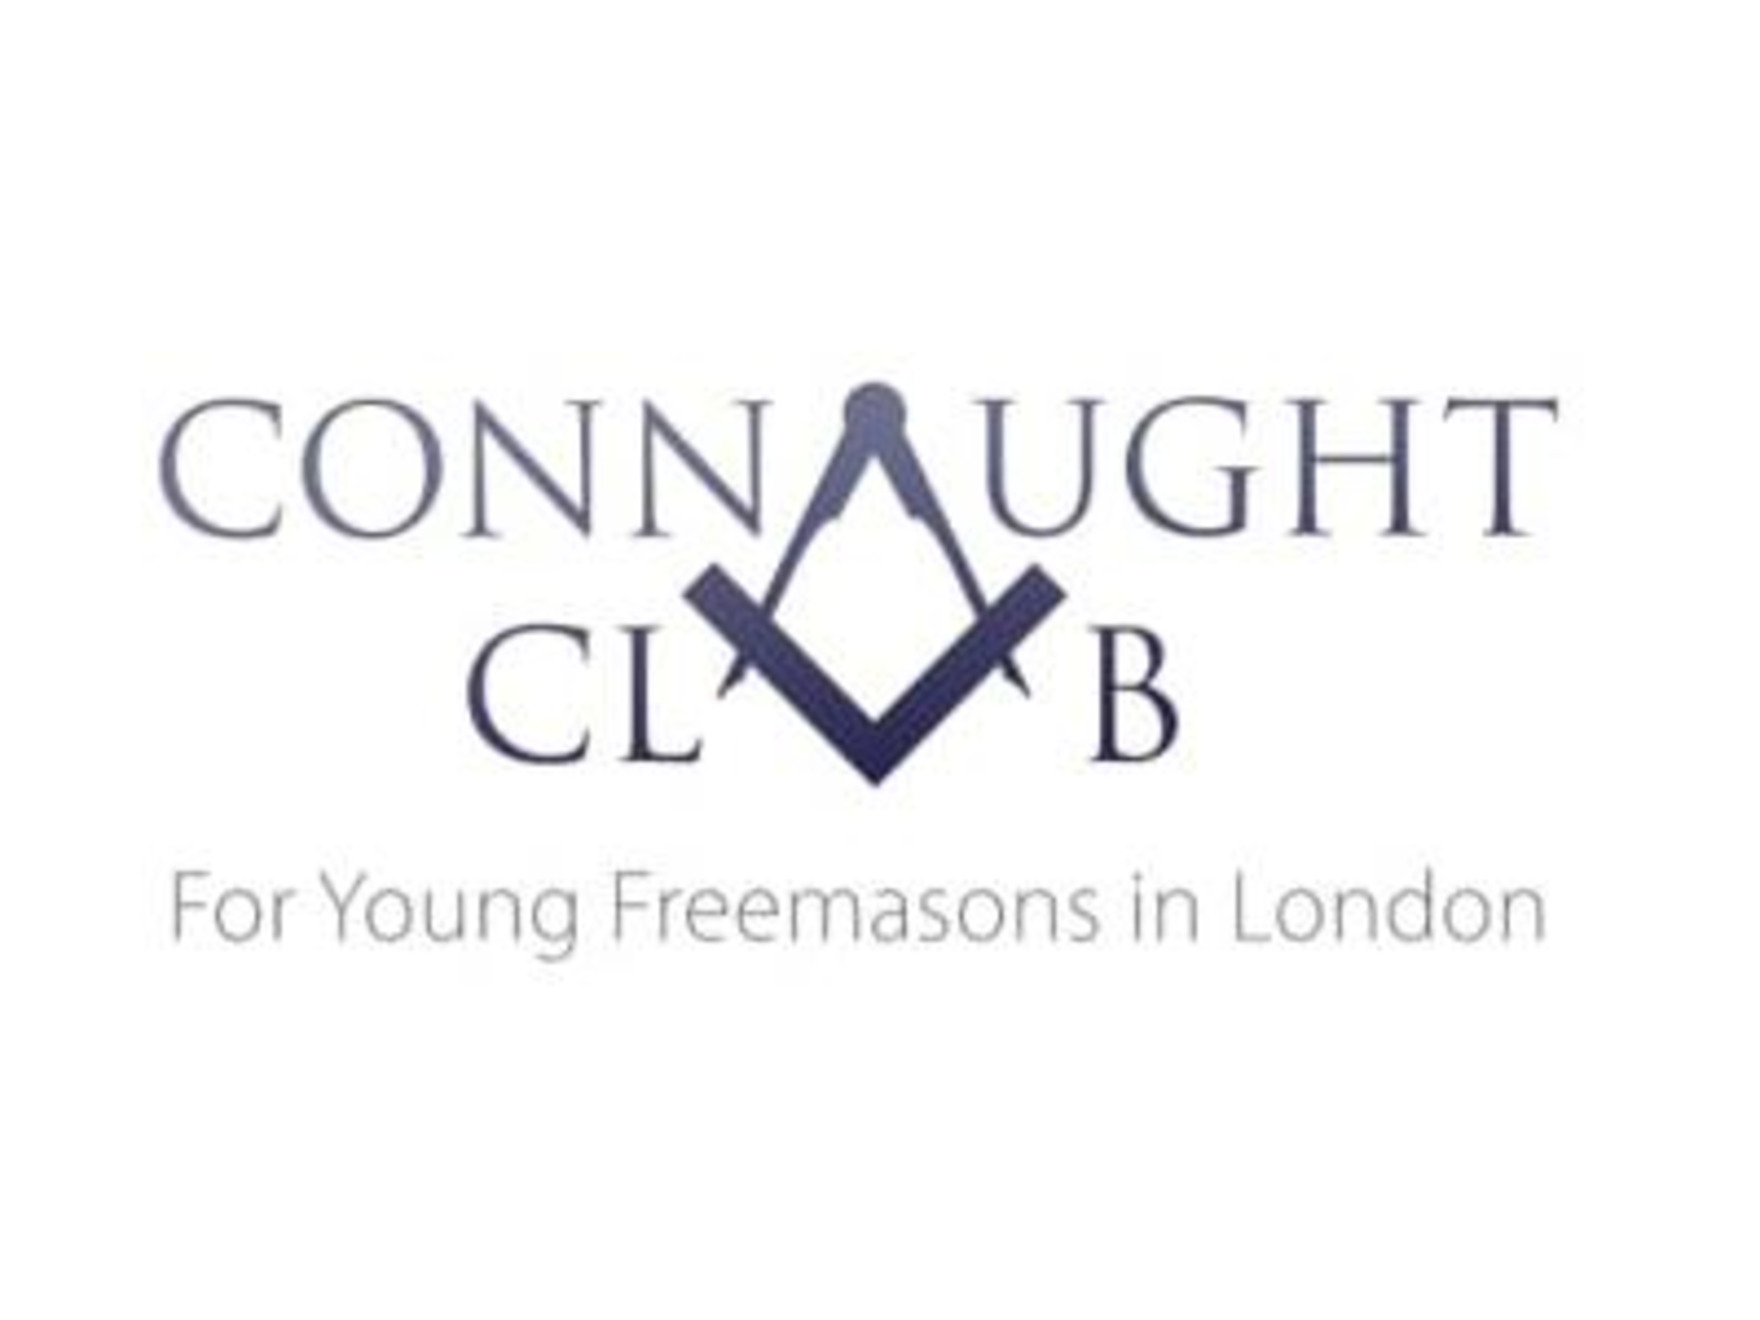 The latest from the Connaught Club